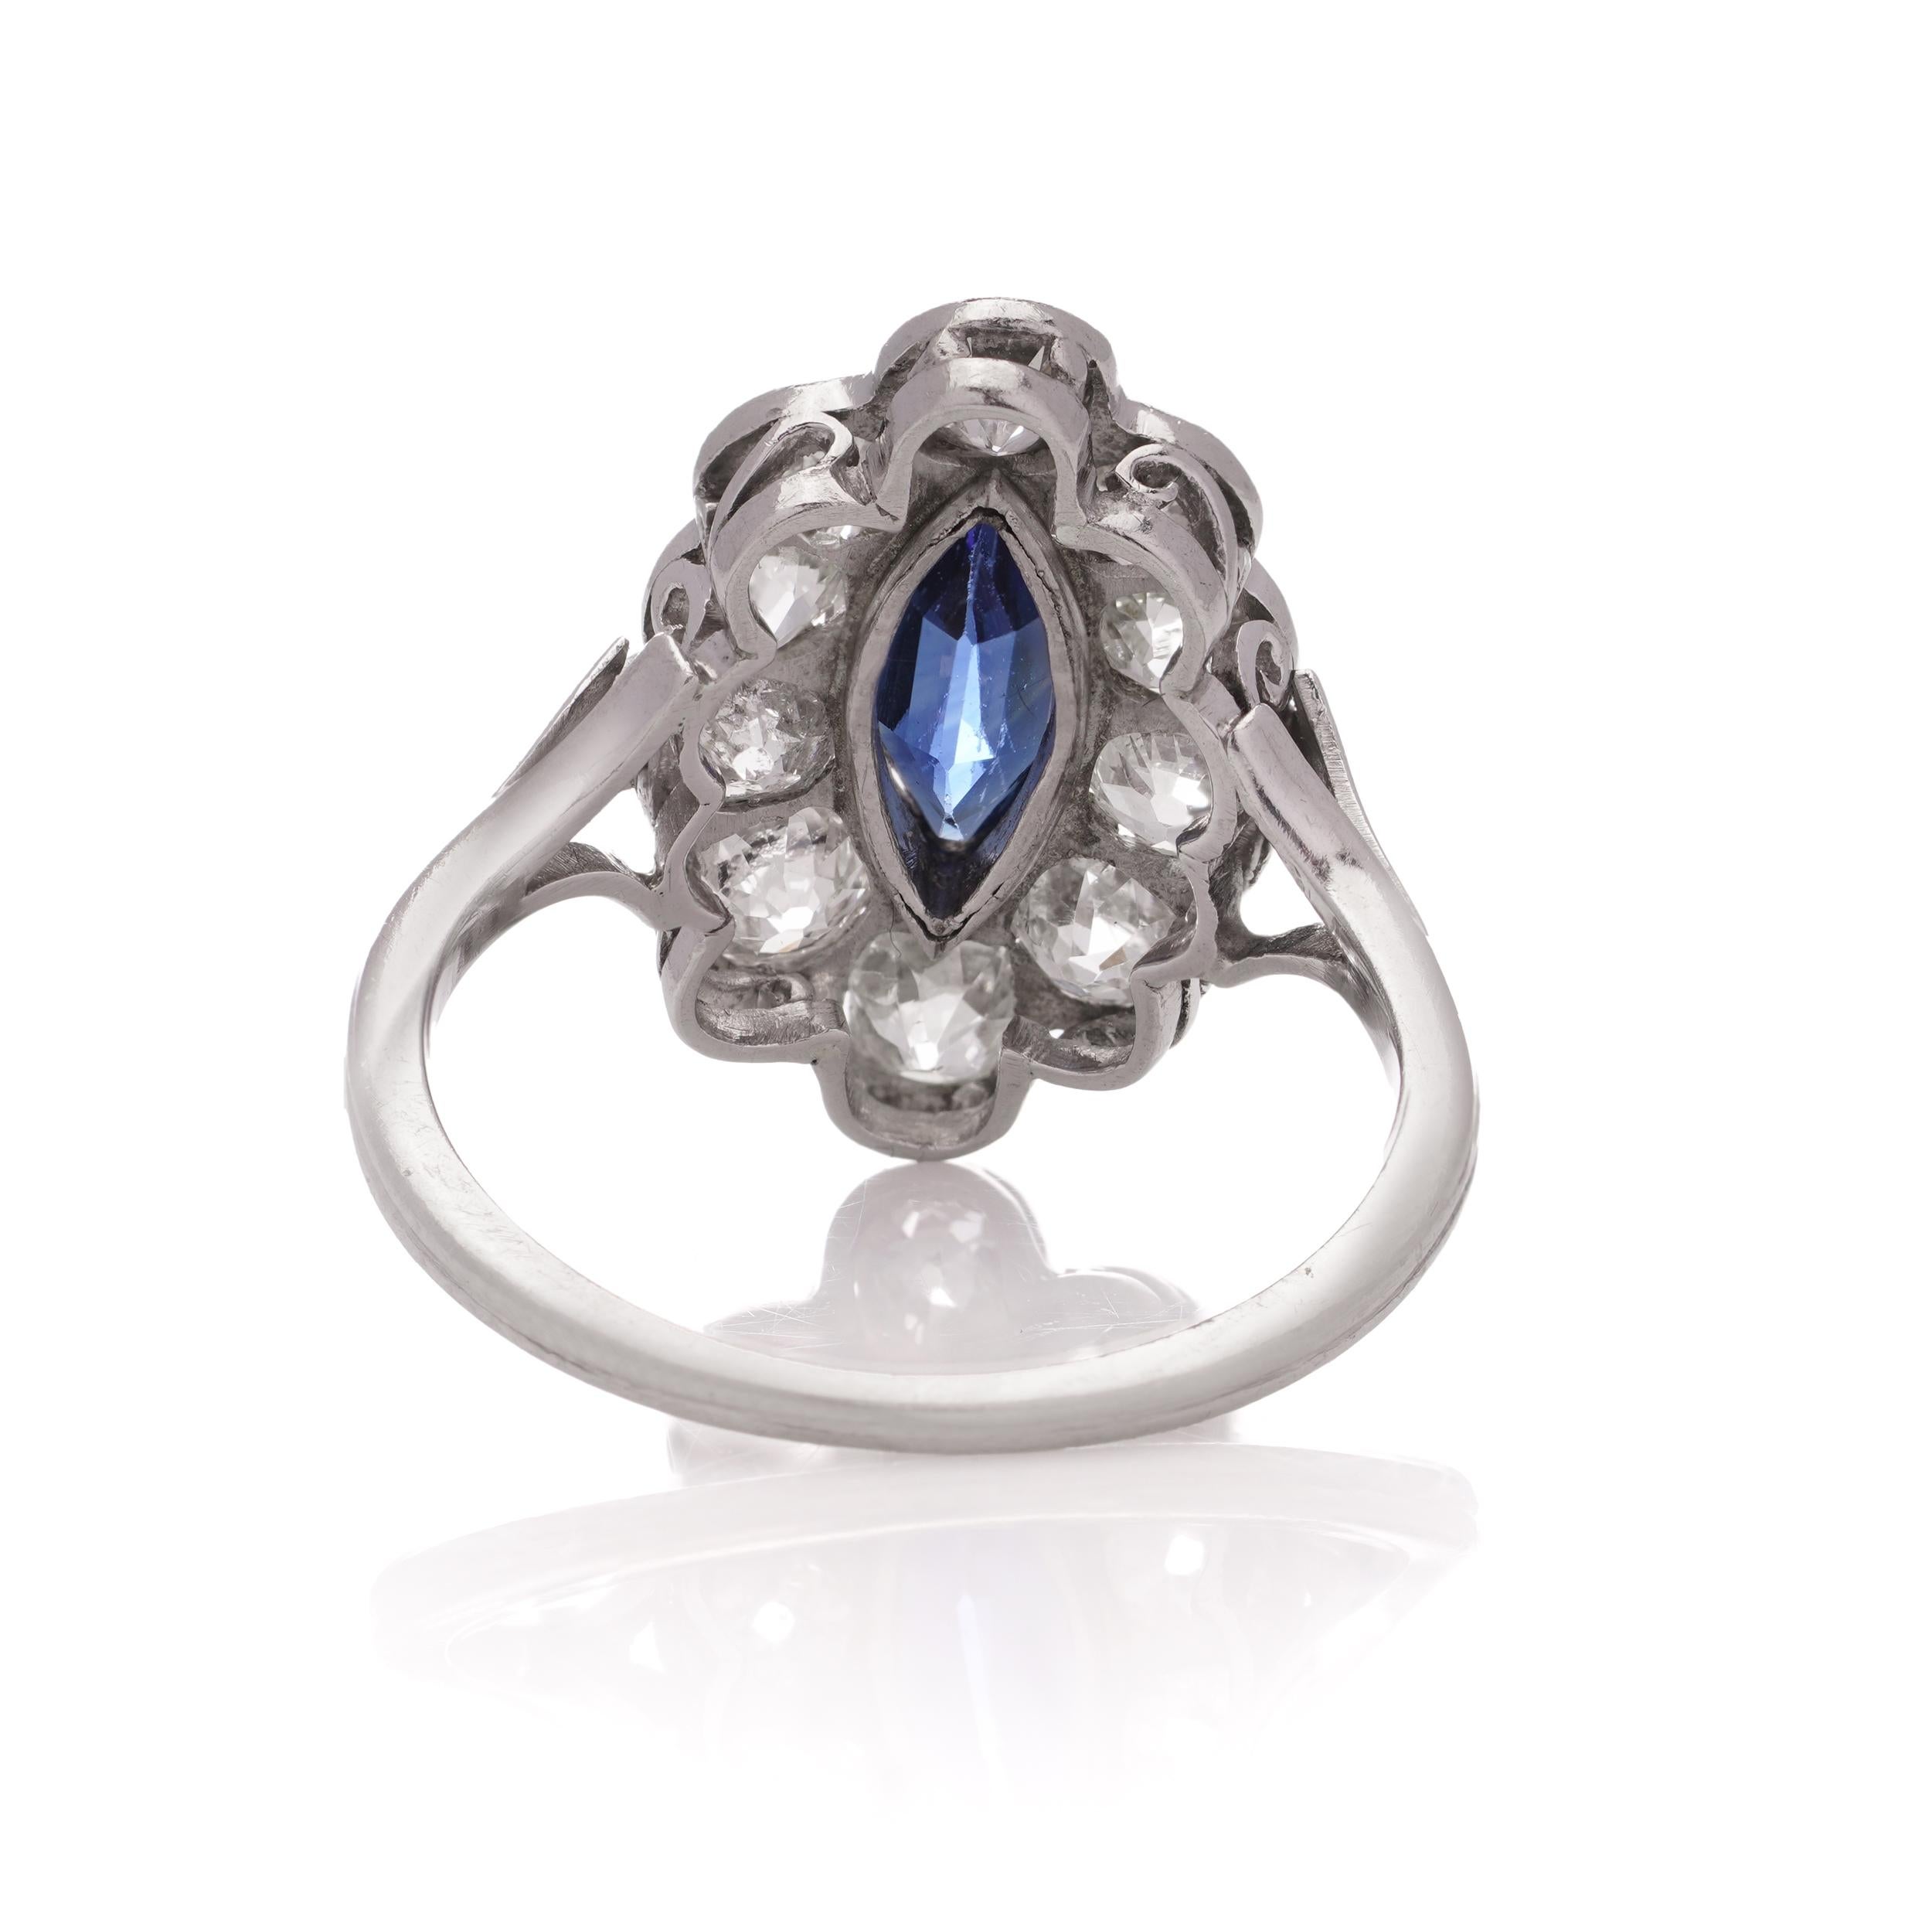 Art Deco Platinum Old - European cut 2.00 carat of Diamond and 1.00 carat of Natural Ceylon Sapphire cluster ladies ring.
Made in Europe, Circa 1920's
Hallmarked for platinum.

Dimensions -
Finger Size (UK) = M (US) = 6.5 (EU) = 54
Weight: 5.00